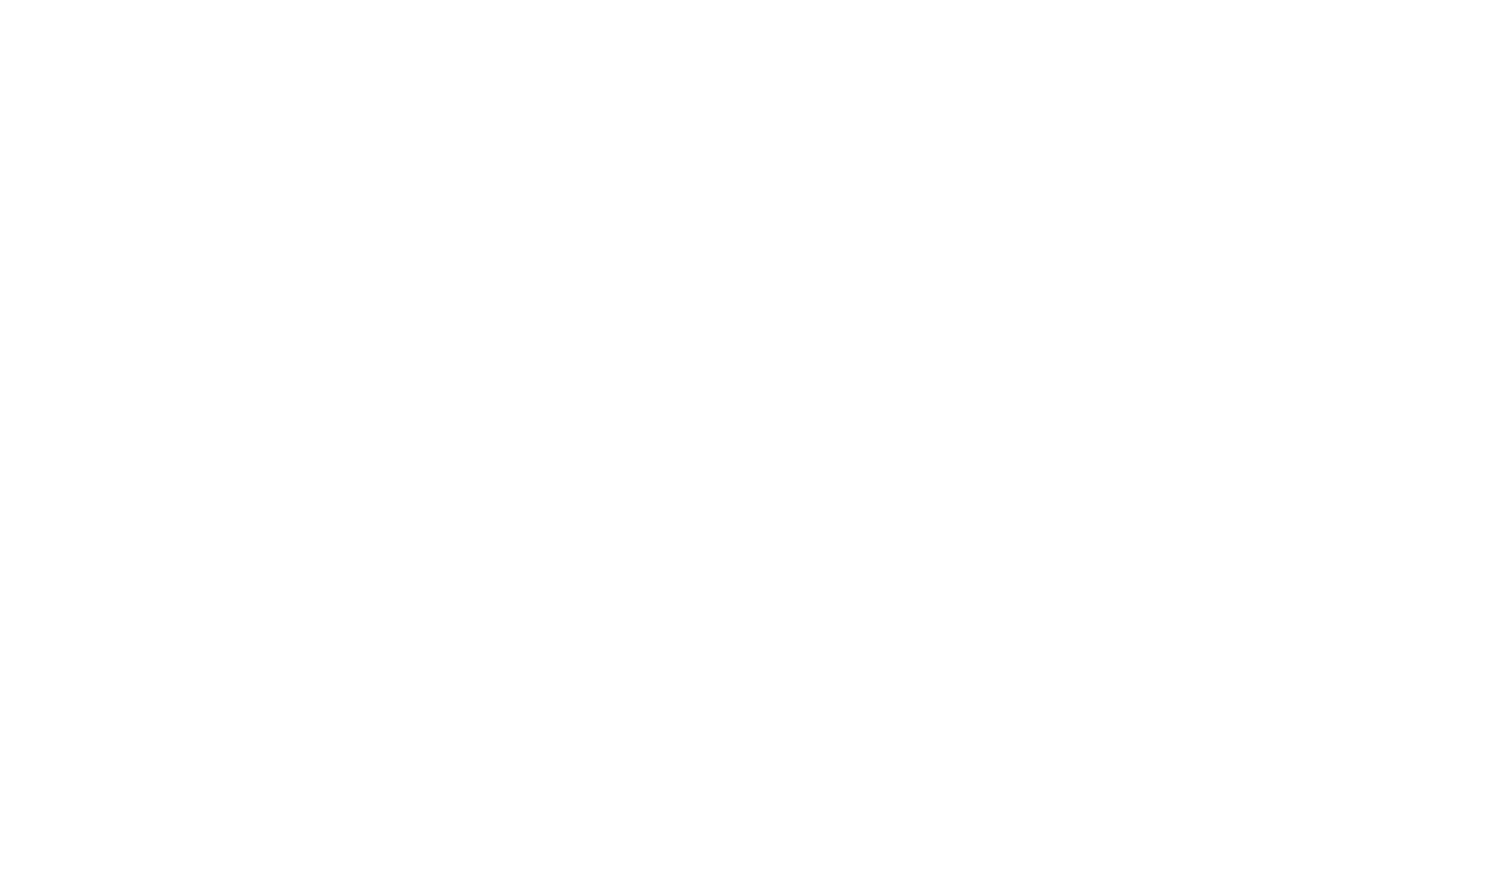  Cloudview Realty and Managment LLC